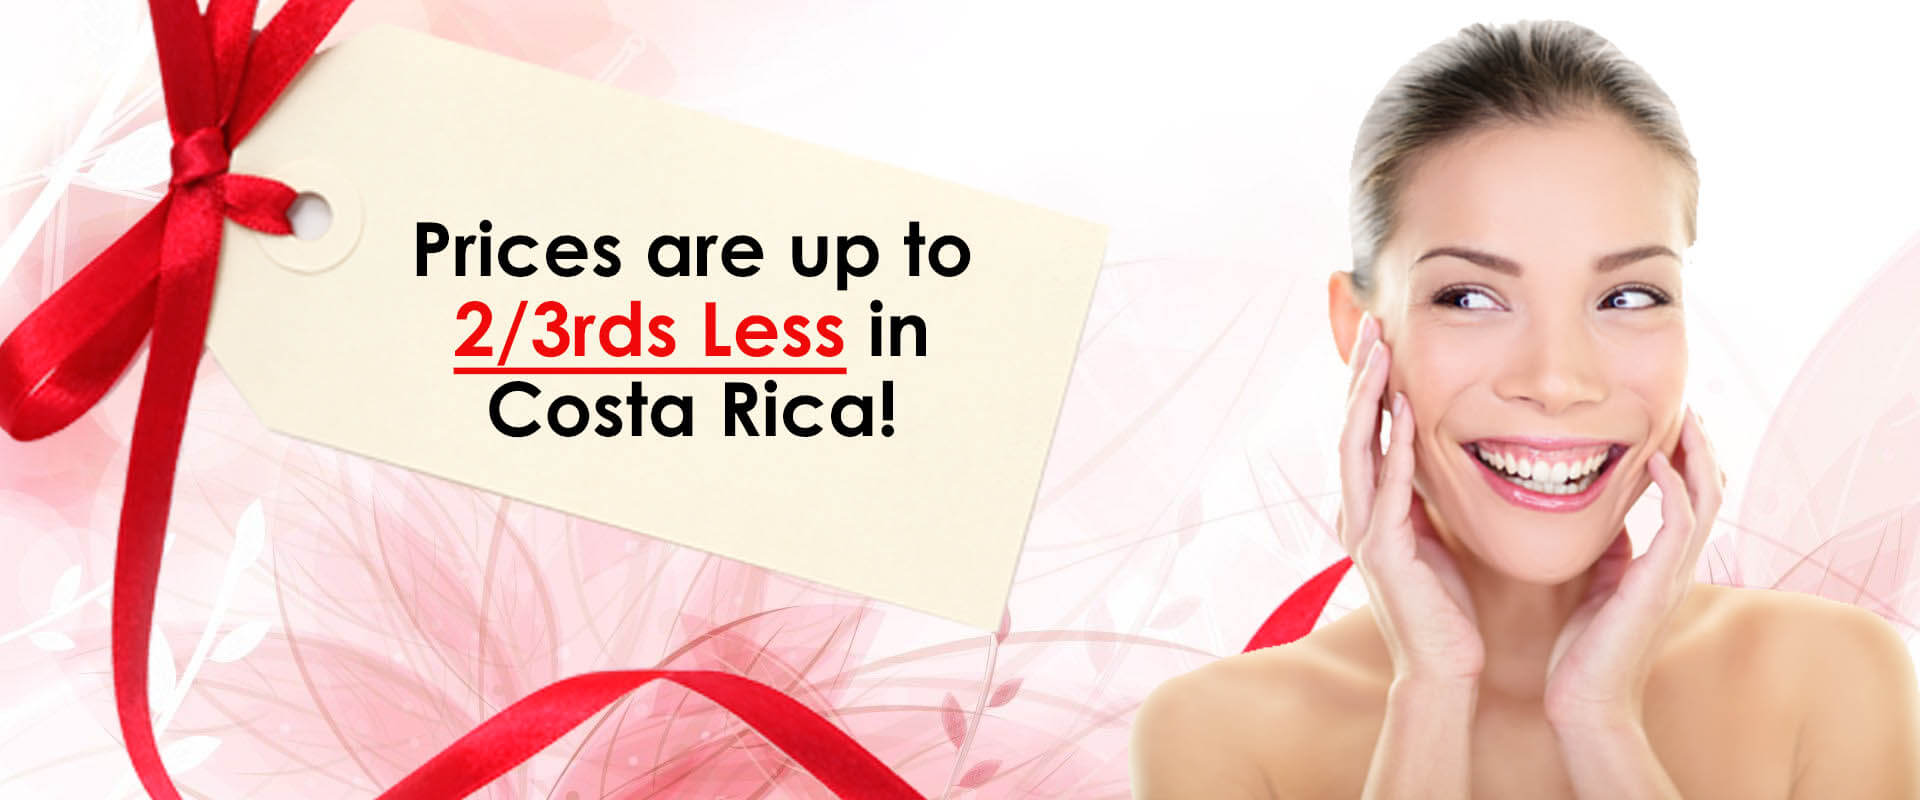 Picture of a smiling woman happy with news that plastic surgery prices are up to 2/3rd's less in Costa Rica.